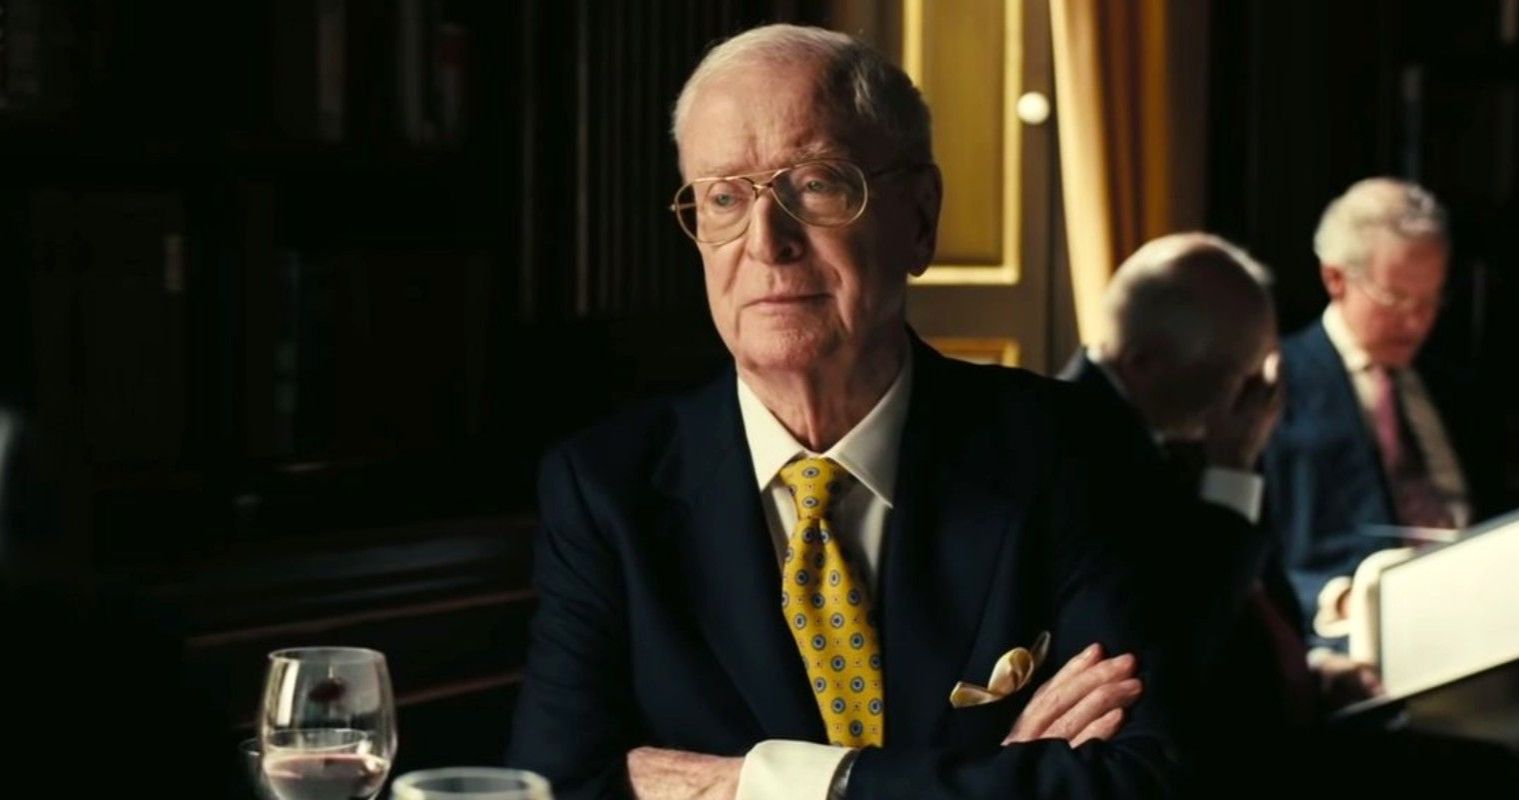 Michael Caine Clears Up Retirement Rumors: I Haven't Retired